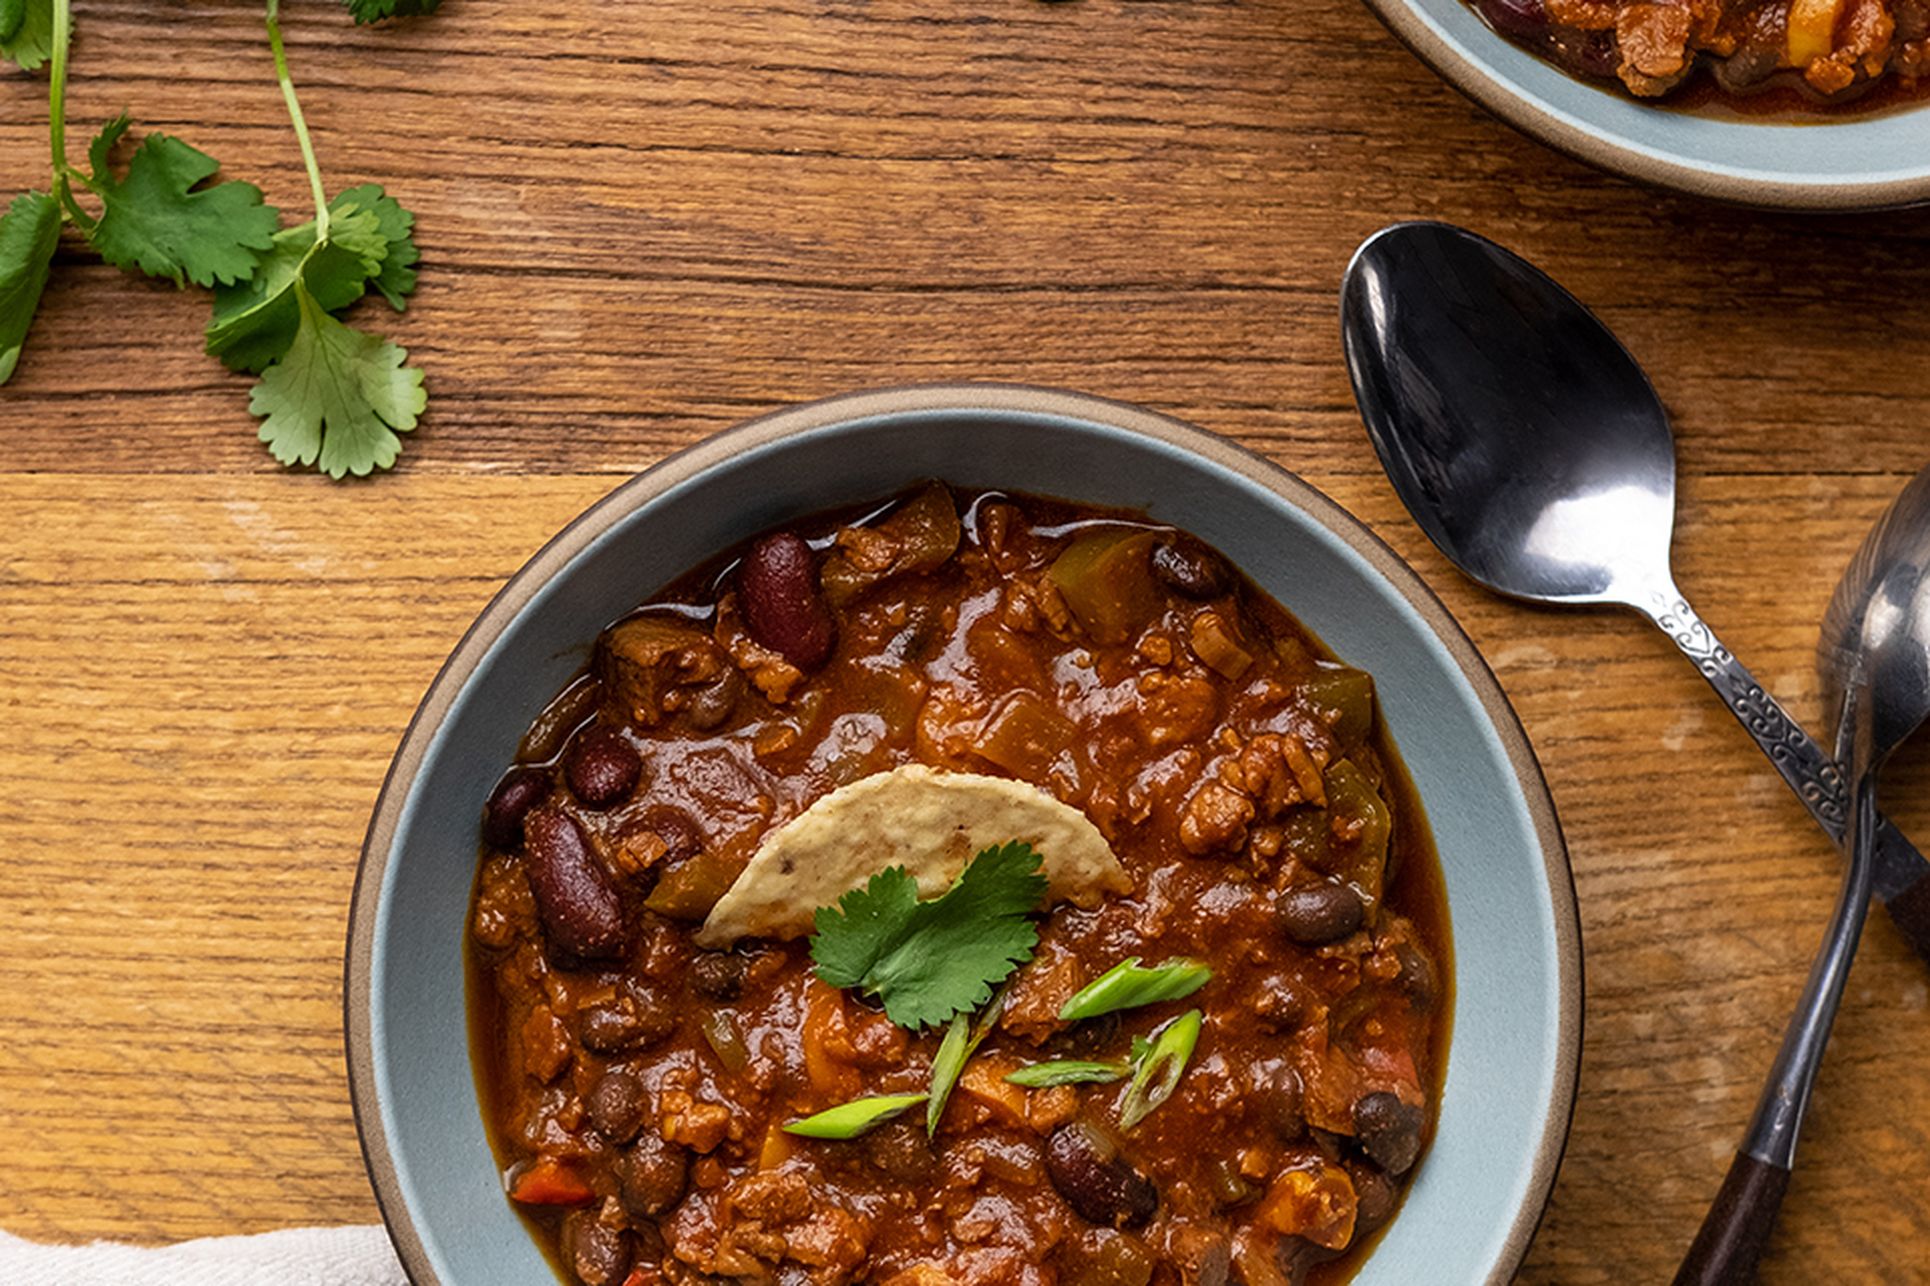 Vegetarian Chili With Beans And Veggie Crumbles Recipe On Food52